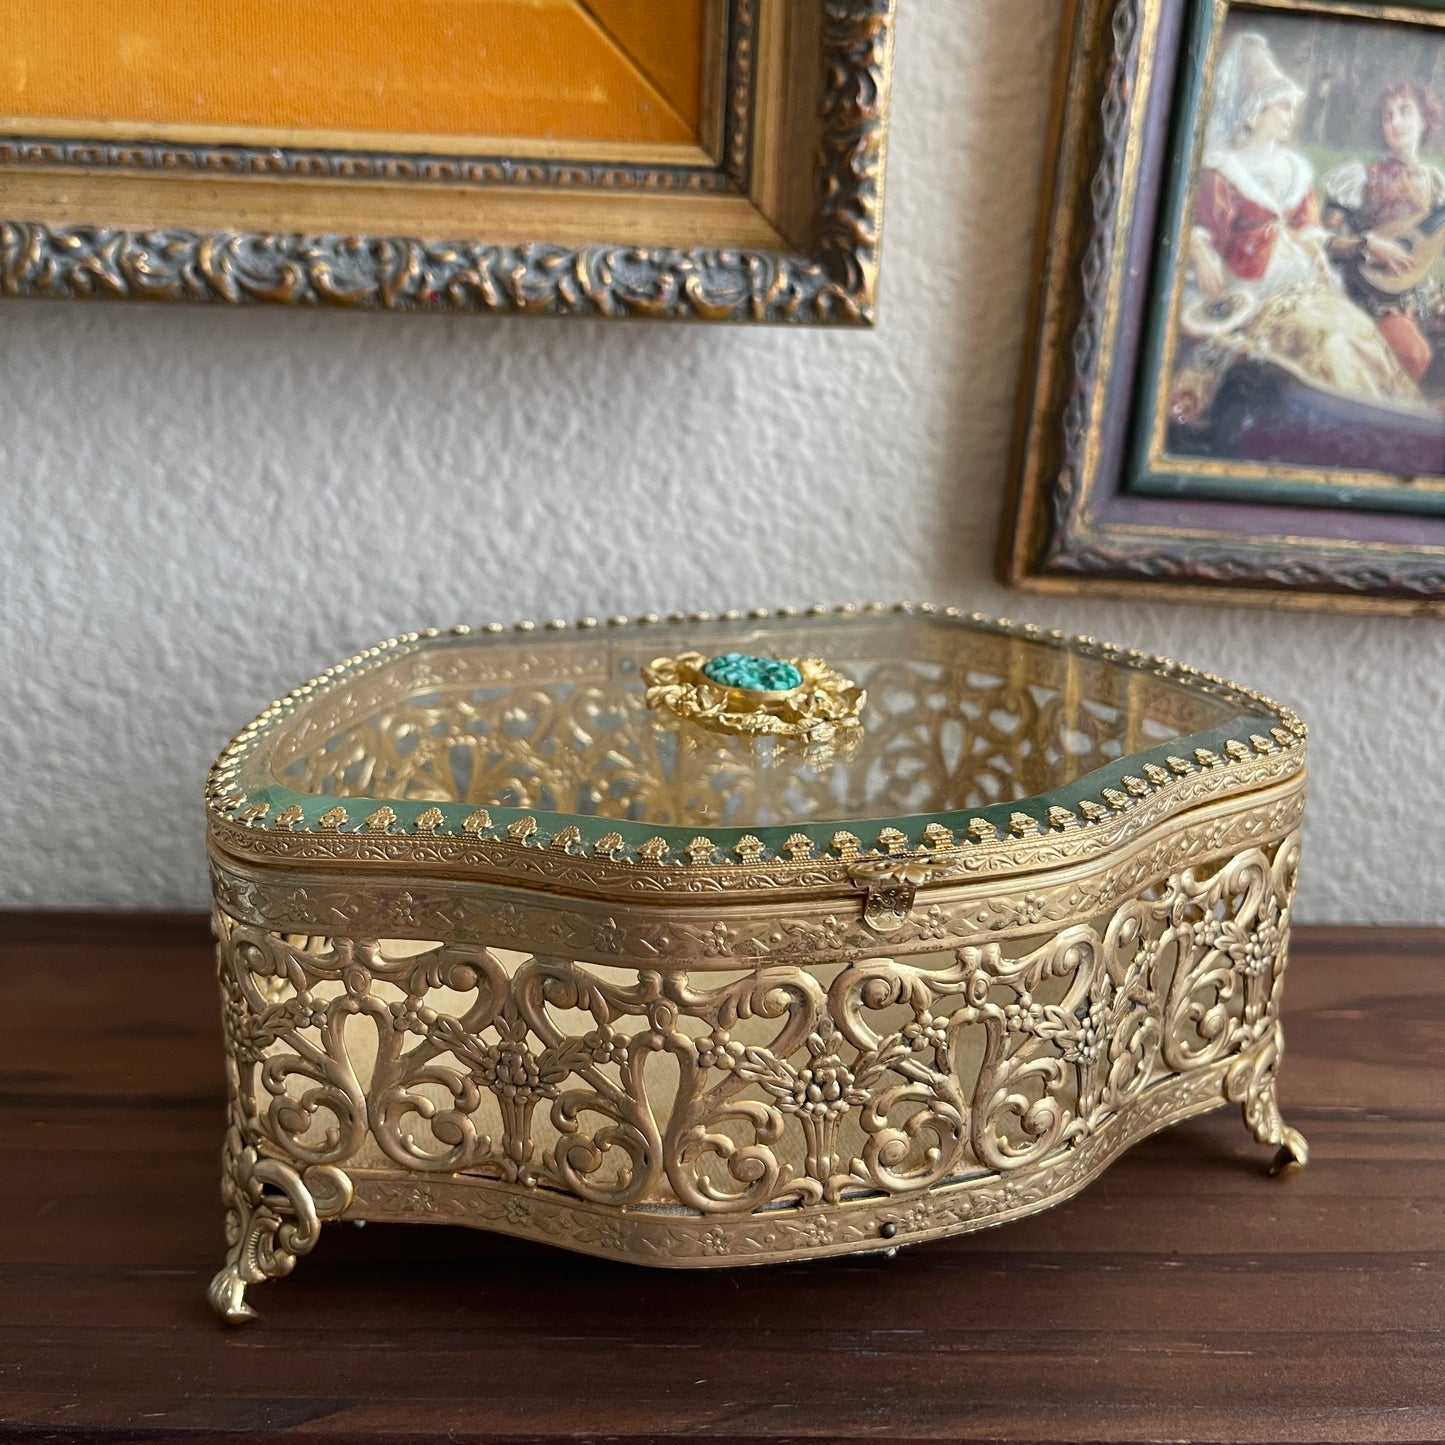 Art Nouveau Gold Gilded Glass Display Jewelry Chests Curio vanity trinket box